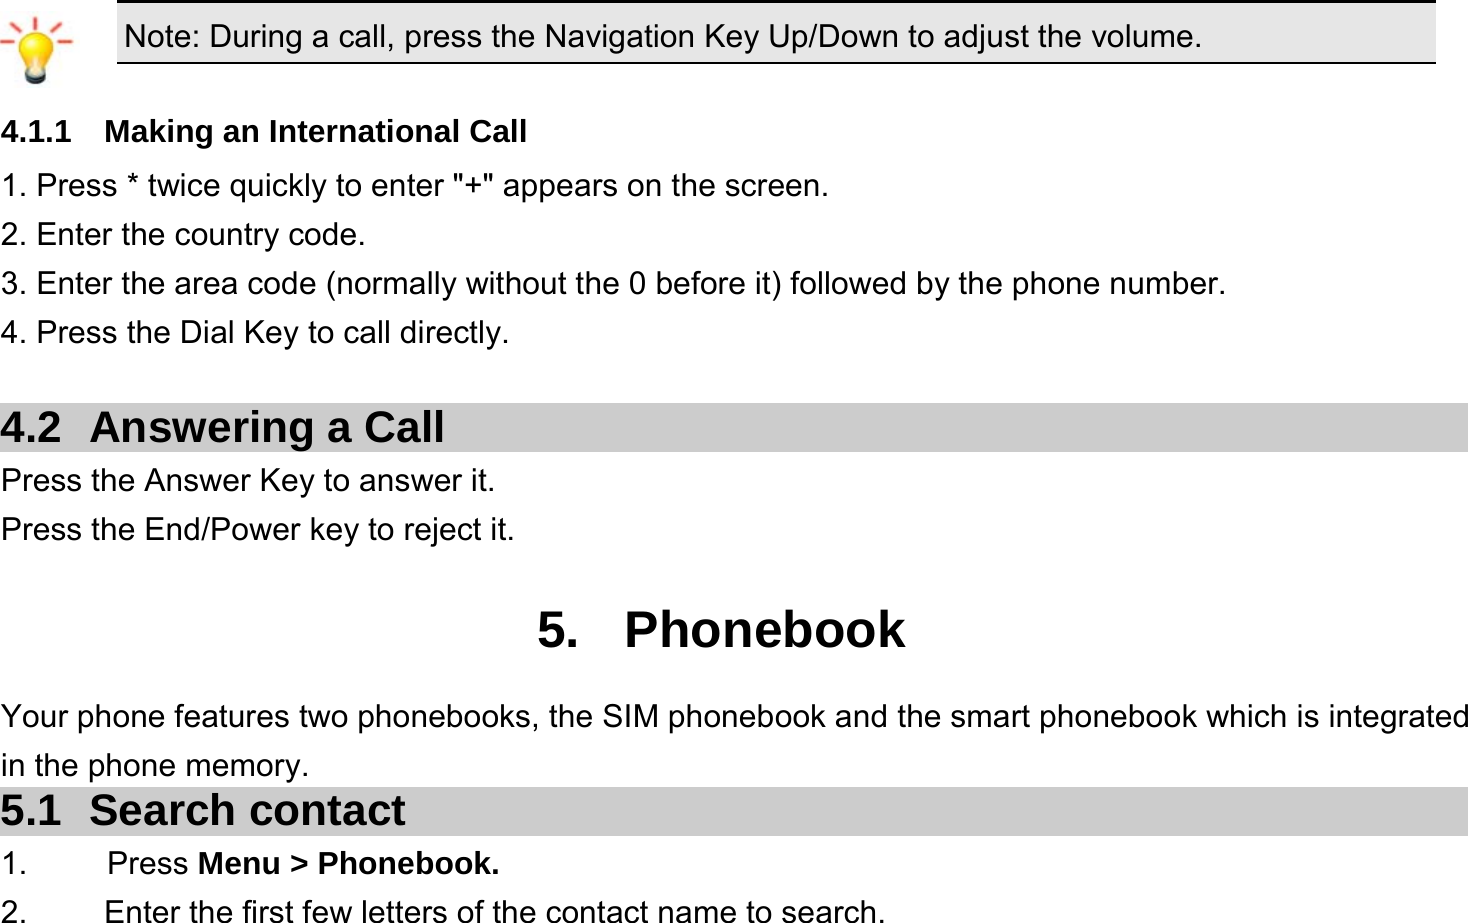  Note: During a call, press the Navigation Key Up/Down to adjust the volume.  4.1.1  Making an International Call 1. Press * twice quickly to enter &quot;+&quot; appears on the screen. 2. Enter the country code. 3. Enter the area code (normally without the 0 before it) followed by the phone number. 4. Press the Dial Key to call directly.  4.2  Answering a Call Press the Answer Key to answer it. Press the End/Power key to reject it.  5. Phonebook Your phone features two phonebooks, the SIM phonebook and the smart phonebook which is integrated in the phone memory. 5.1 Search contact 1.     Press Menu &gt; Phonebook. 2.  Enter the first few letters of the contact name to search. 